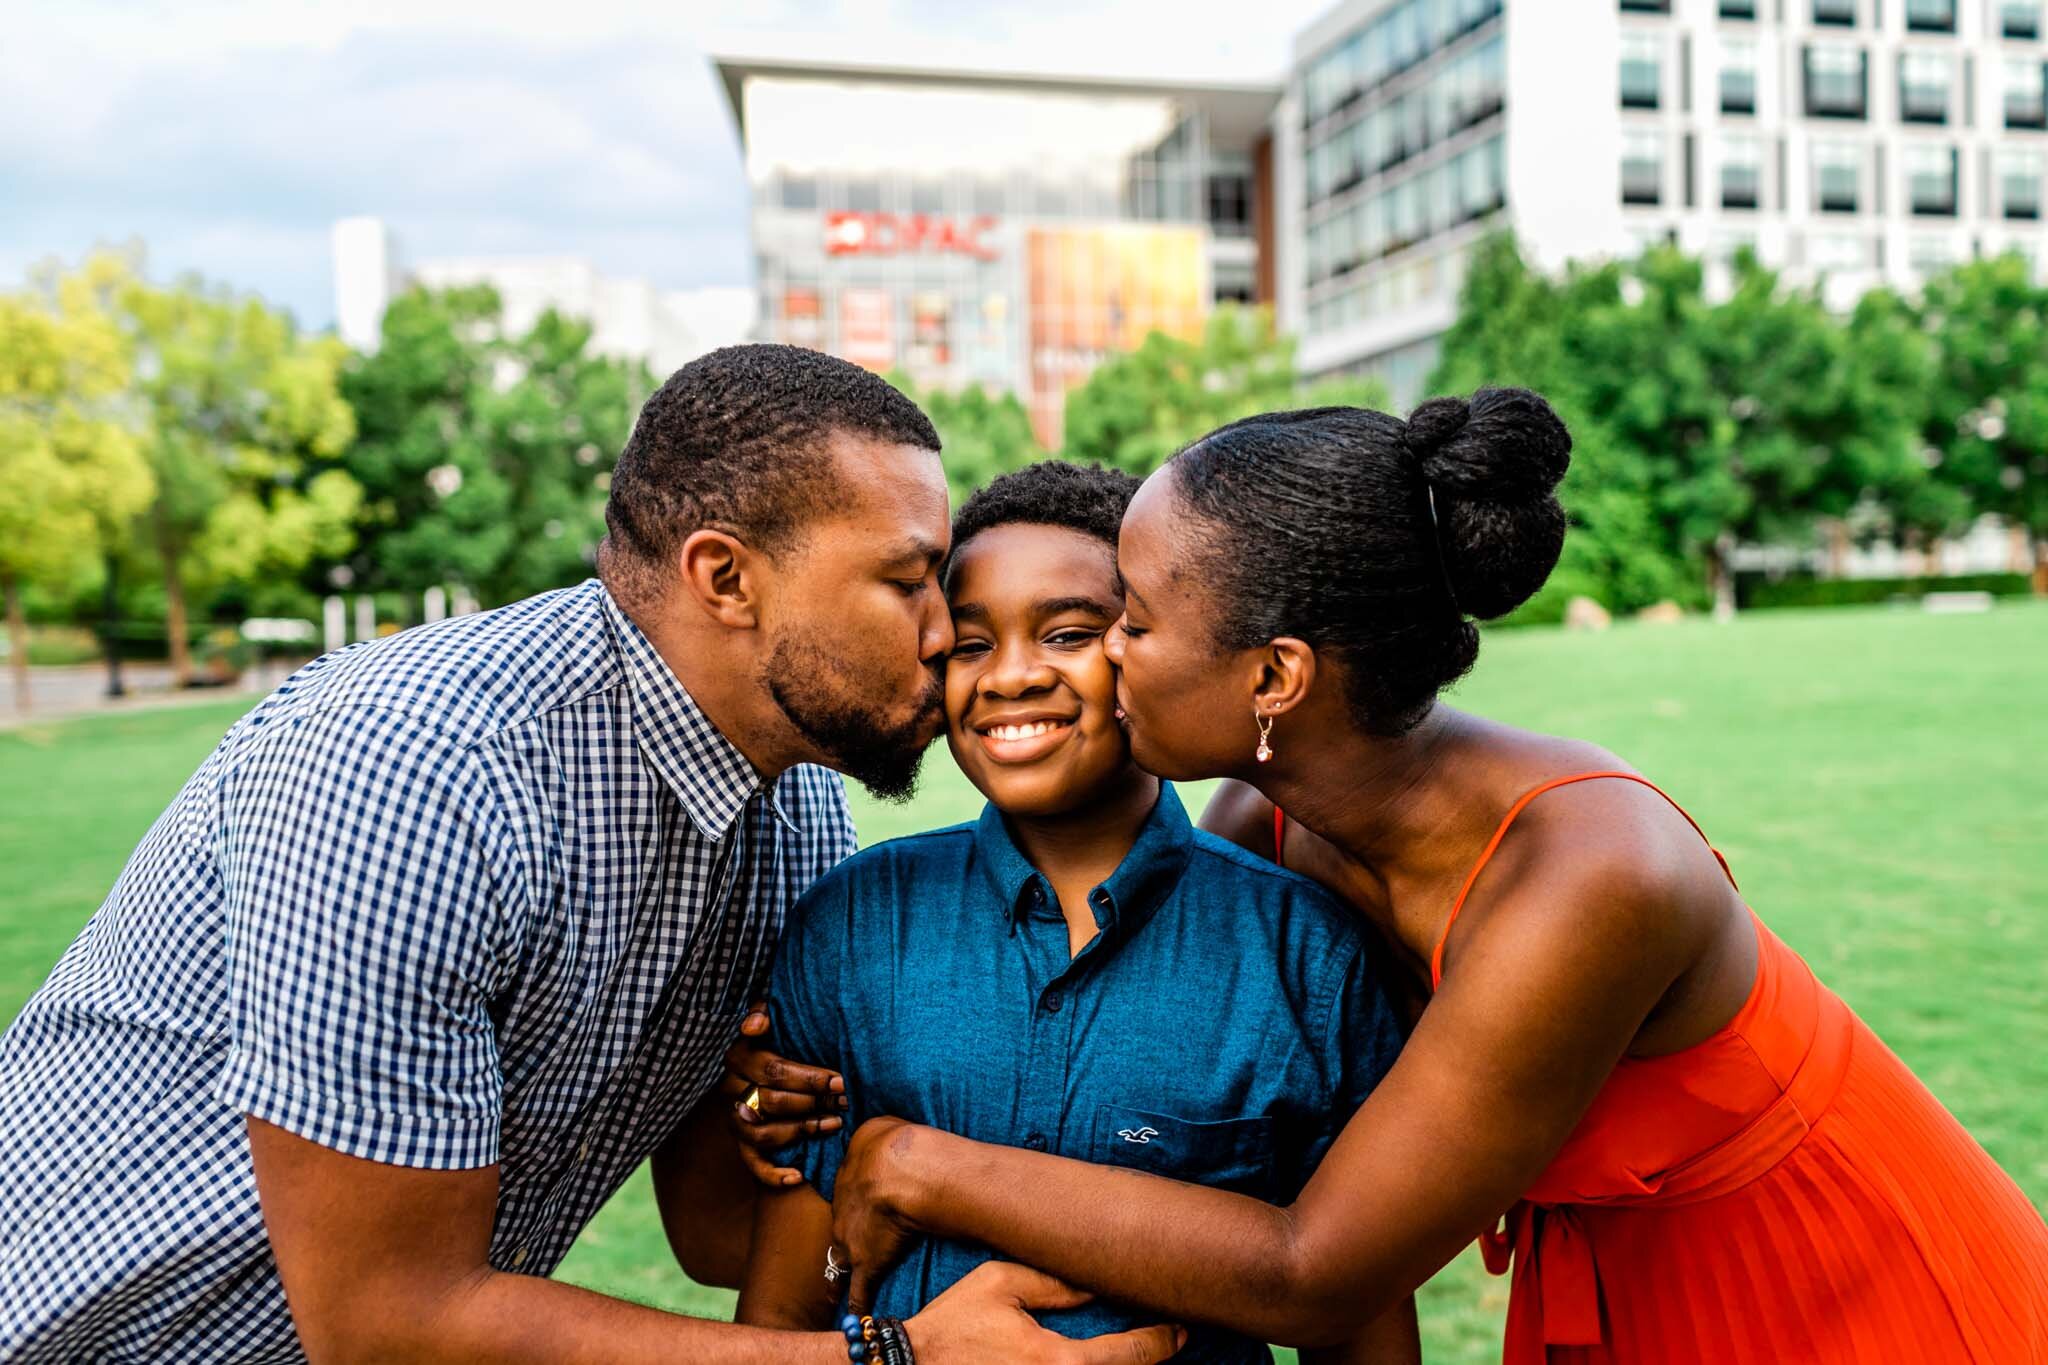 Durham Family Photographer | By G. Lin Photography | Young boy standing in between man and woman